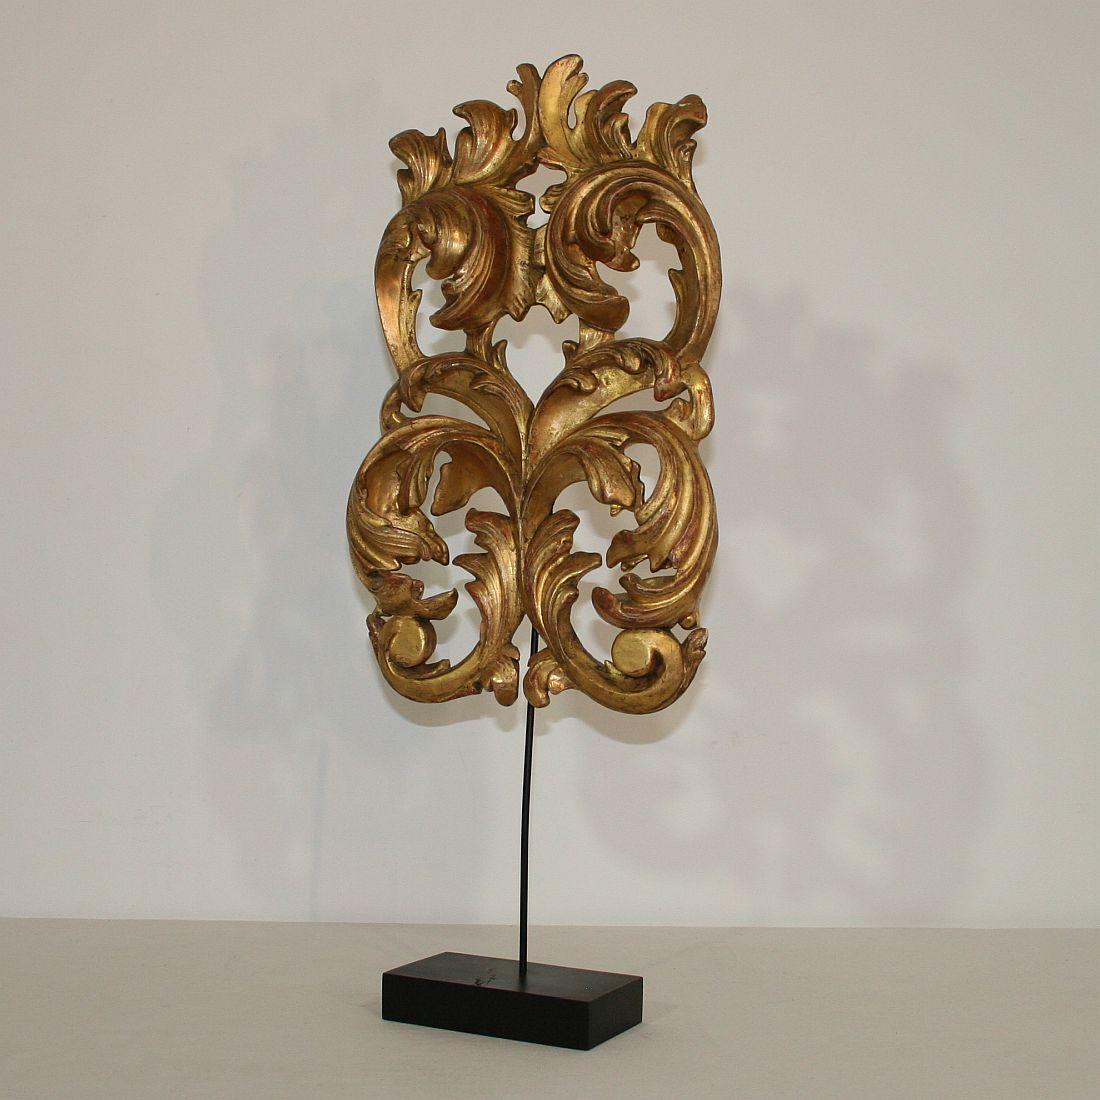 Hand-Carved Gilded 18th Century Italian Baroque Carved Wooden Curl